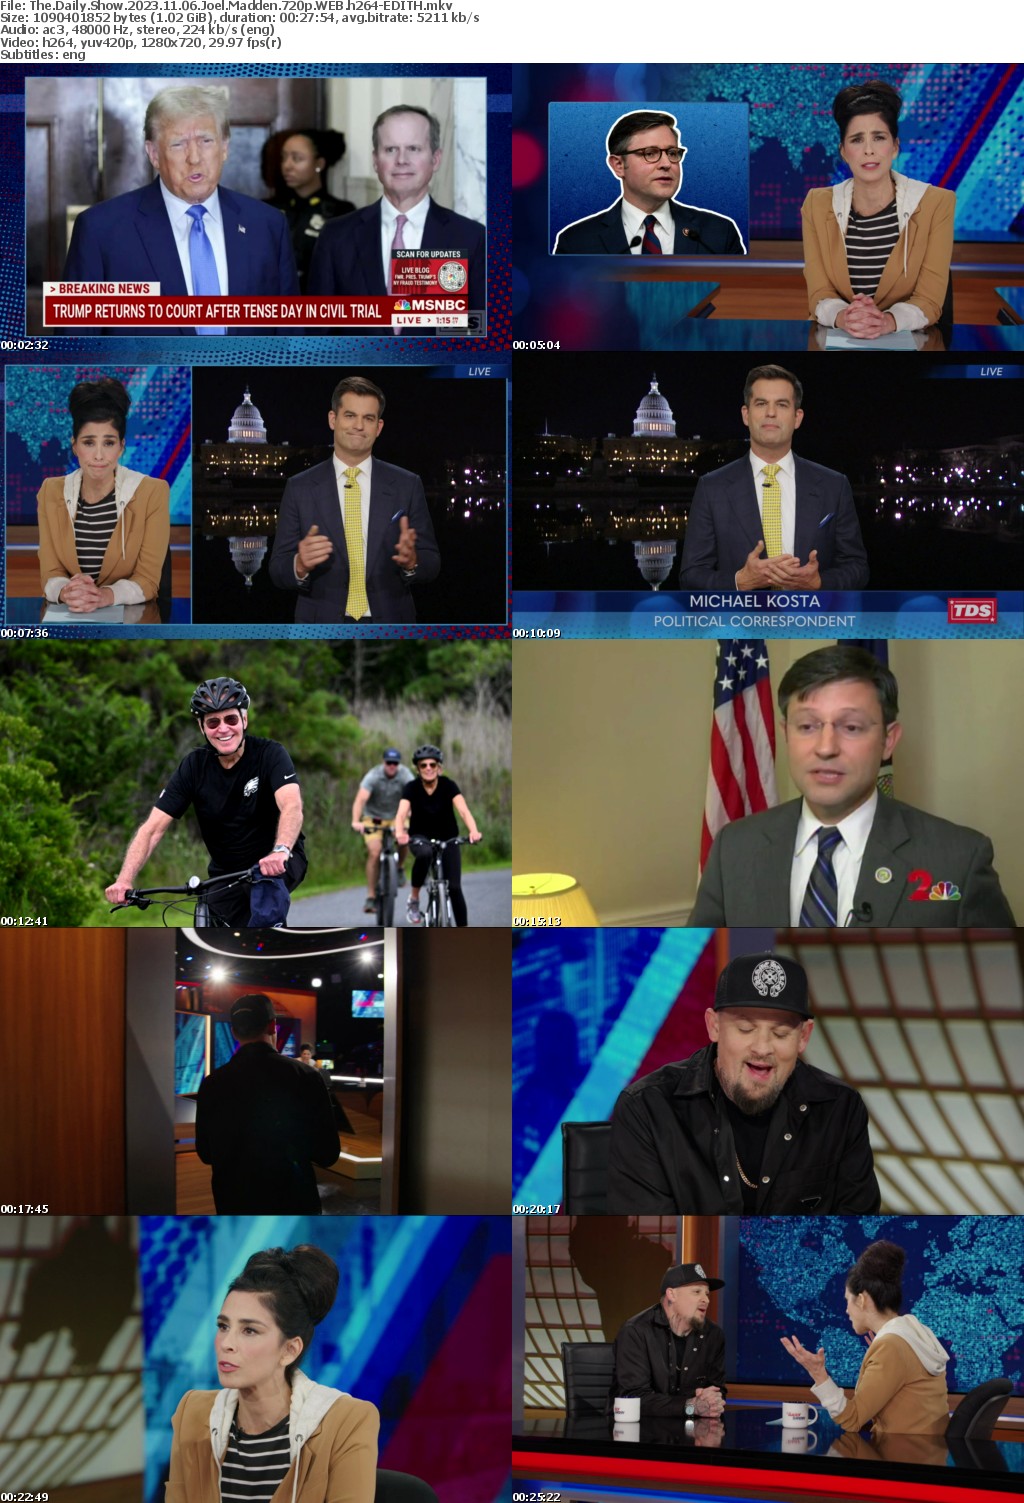 The Daily Show 2023 11 06 Joel Madden 720p WEB h264-EDITH